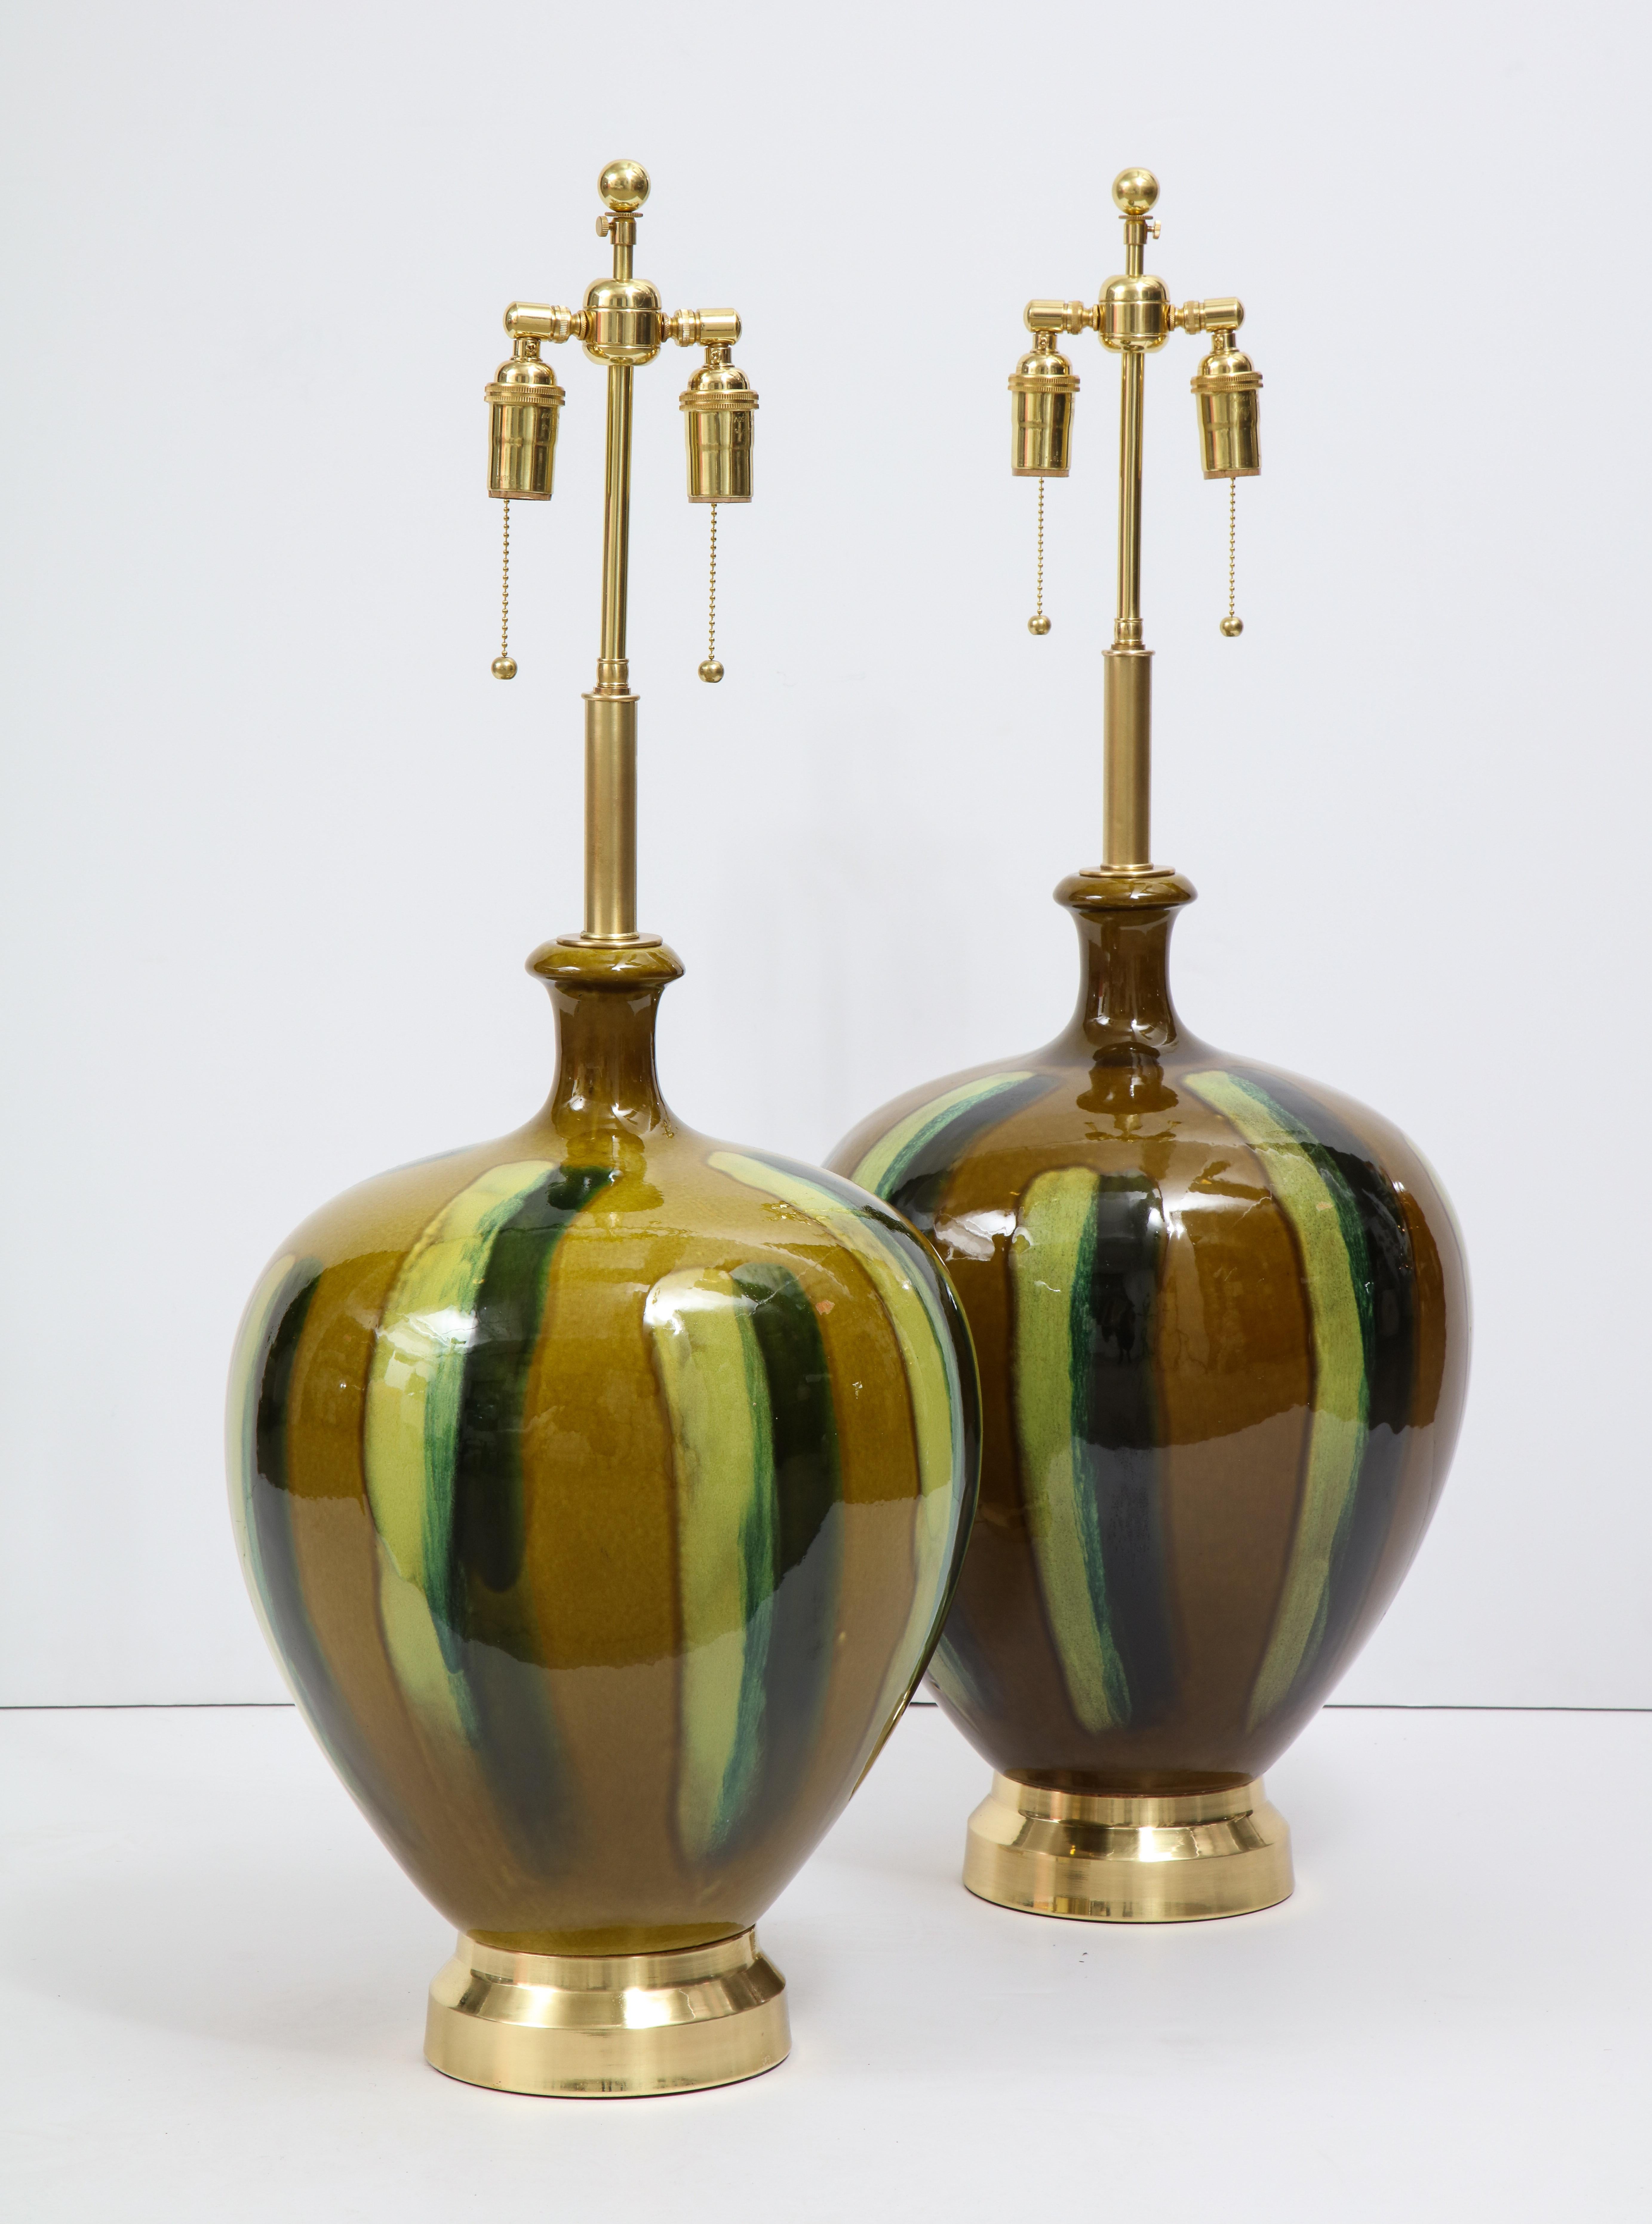 Pair of large Italian ceramic lamps with a beautiful drip glazed finish on polished brass
bases. The lamps have been newly rewired with brass double clusters.